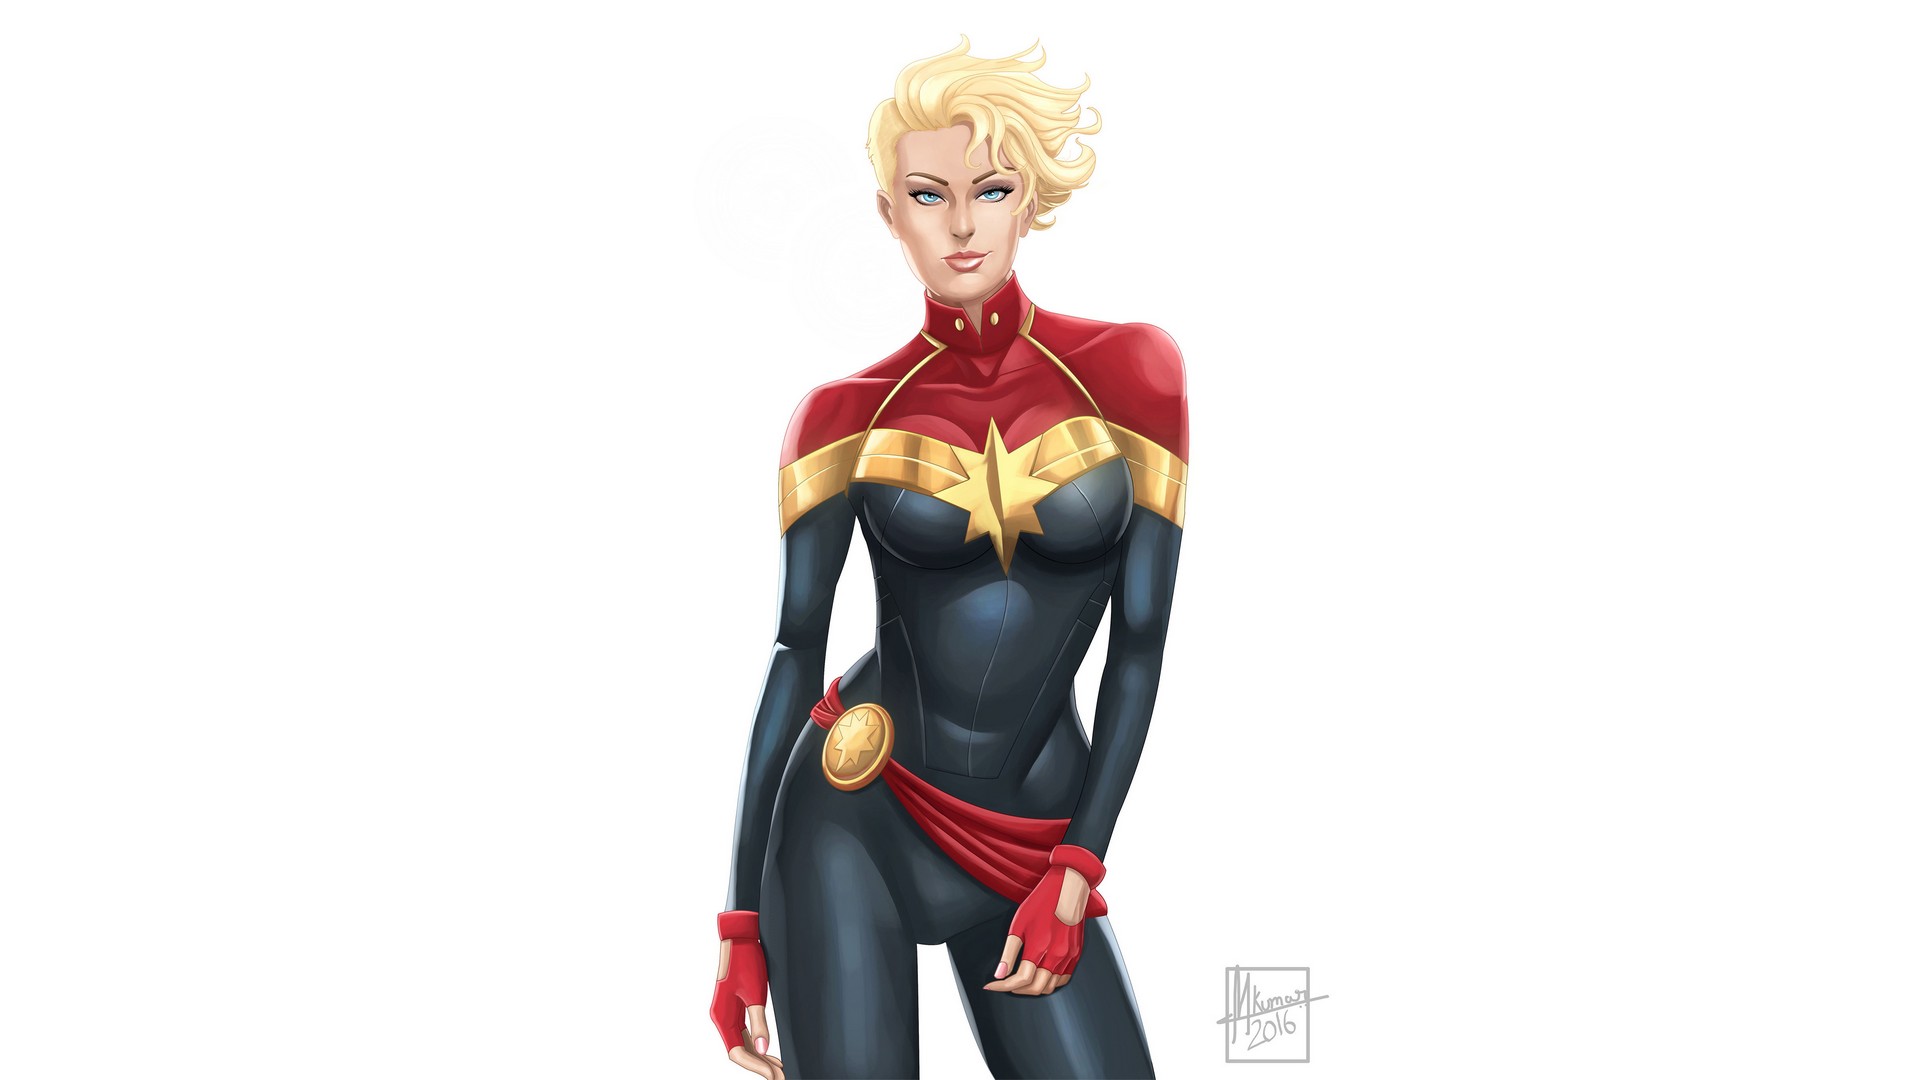 Captain Marvel Animated Wallpaper HD With high-resolution 1920X1080 pixel. You can use this wallpaper for your Desktop Computer Backgrounds, Mac Wallpapers, Android Lock screen or iPhone Screensavers and another smartphone device